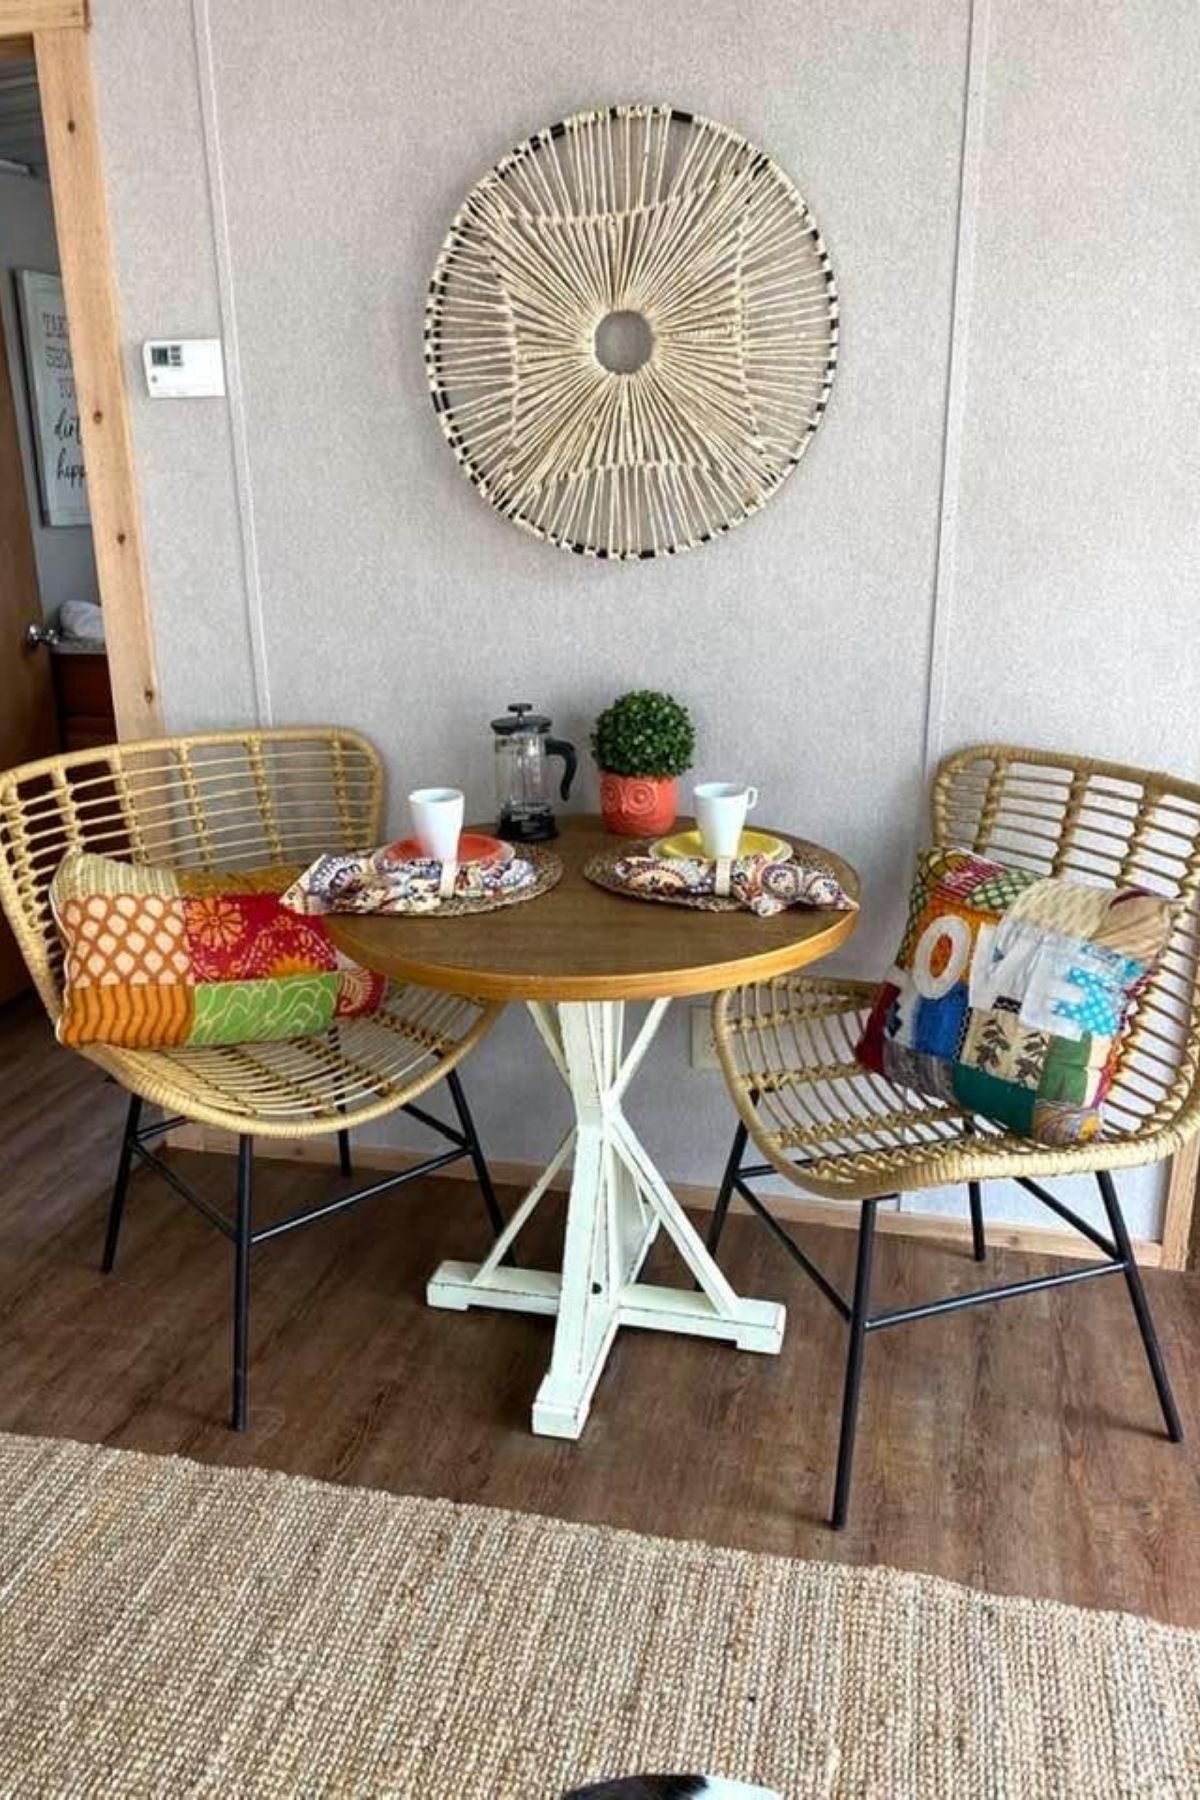 wicker chairs next to round table against wall